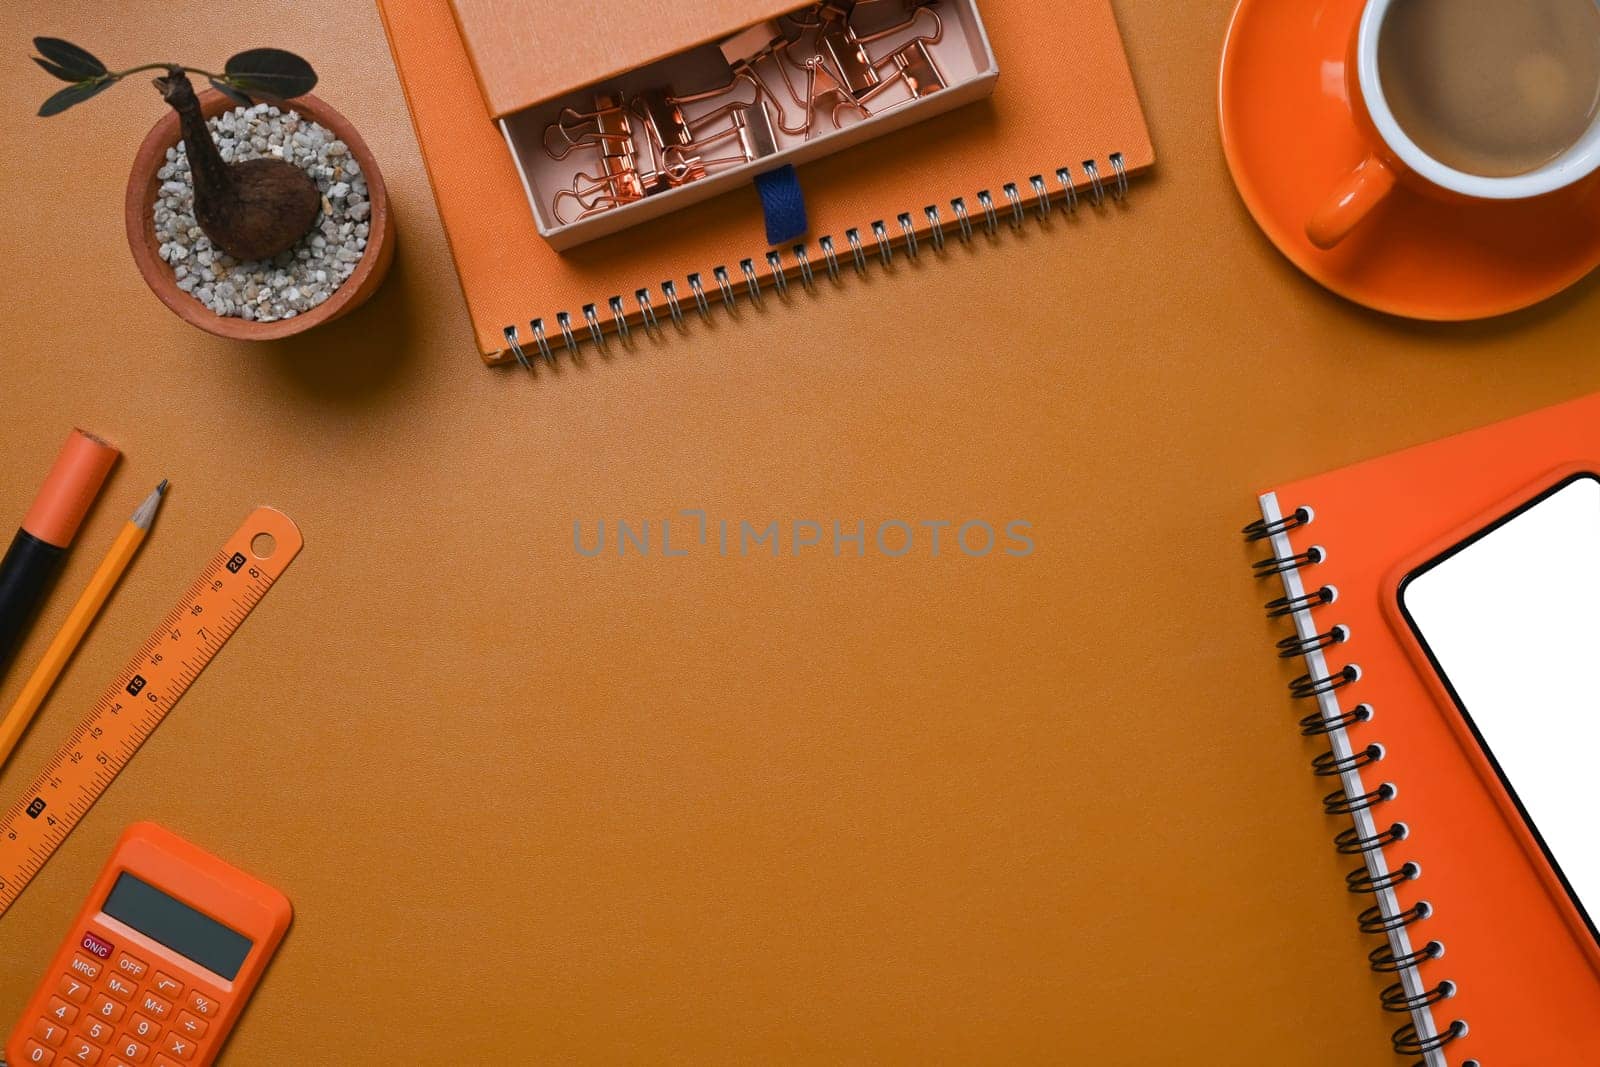 Stylish workspace with mobile phone, coffee cup and stationery on brown leather.